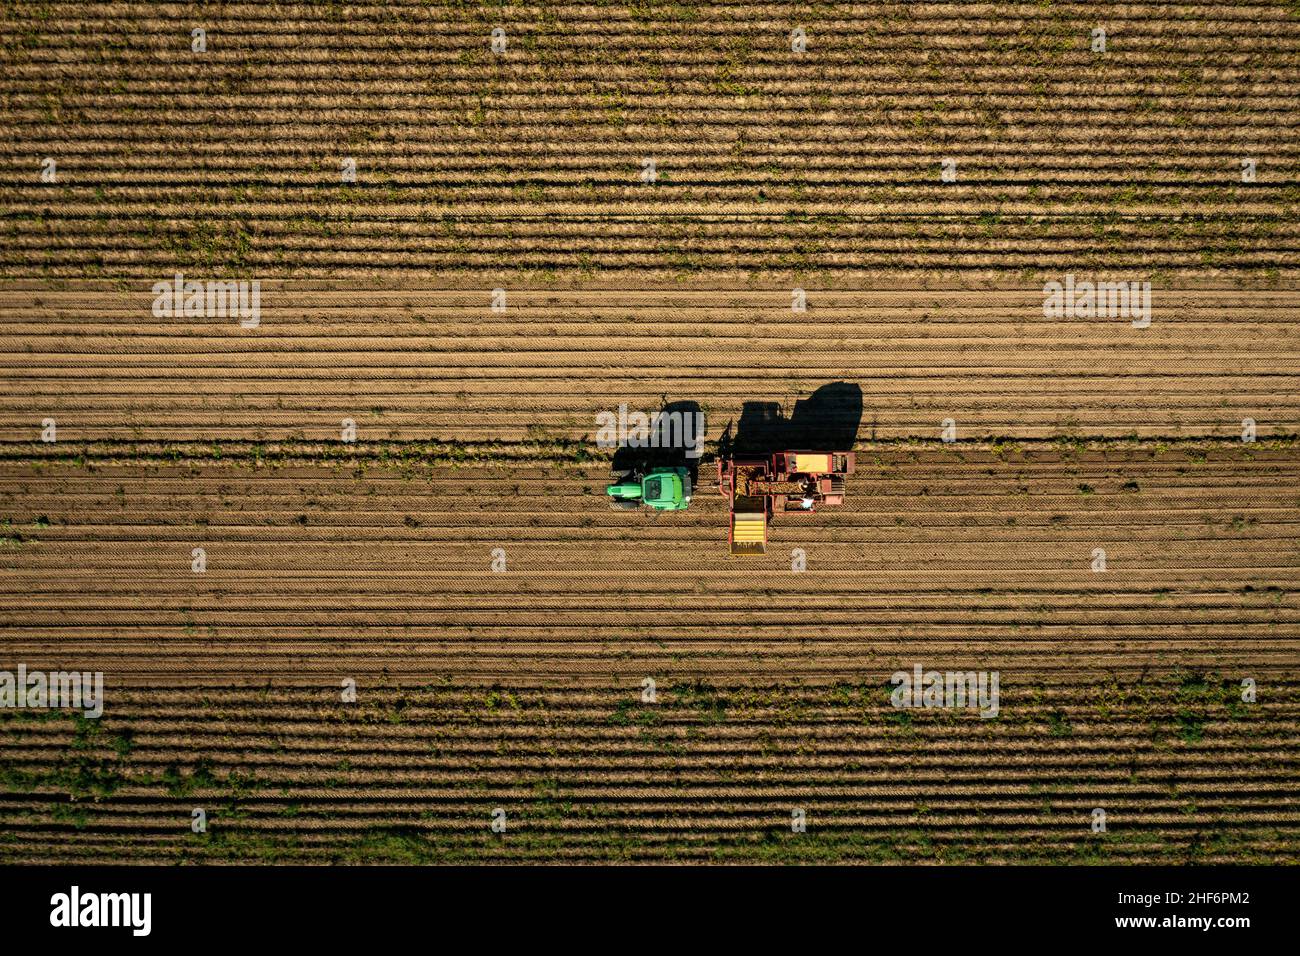 Harvest of potatoes at a field,  captured by a drone from above with countryside worker collecting potatoes on a tractor Stock Photo